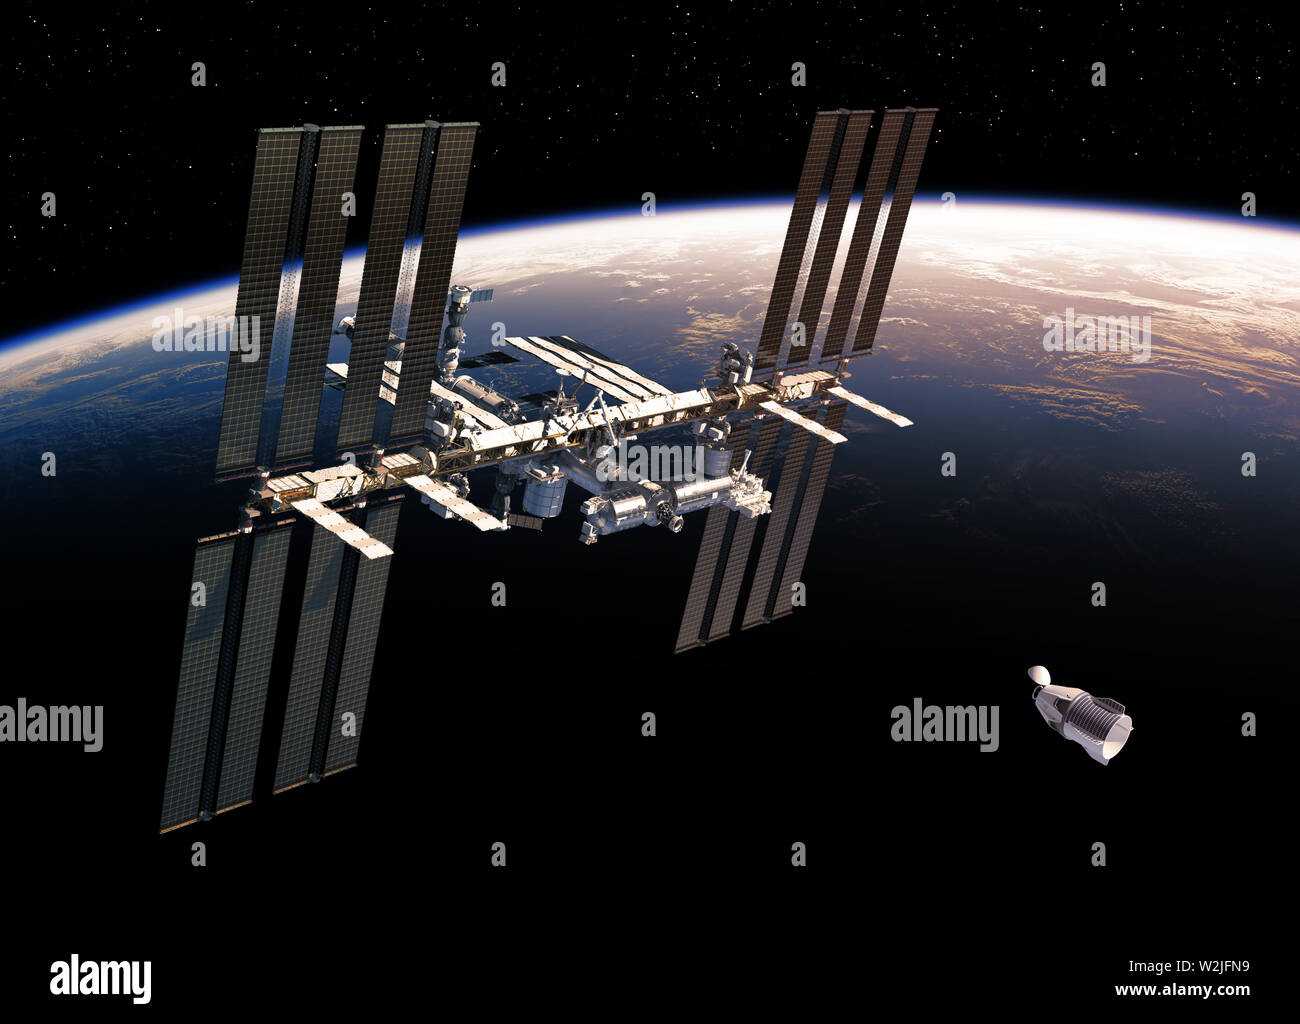 Commercial Spacecraft And International Space Station Orbiting Earth. 3D Illustration. Stock Photo